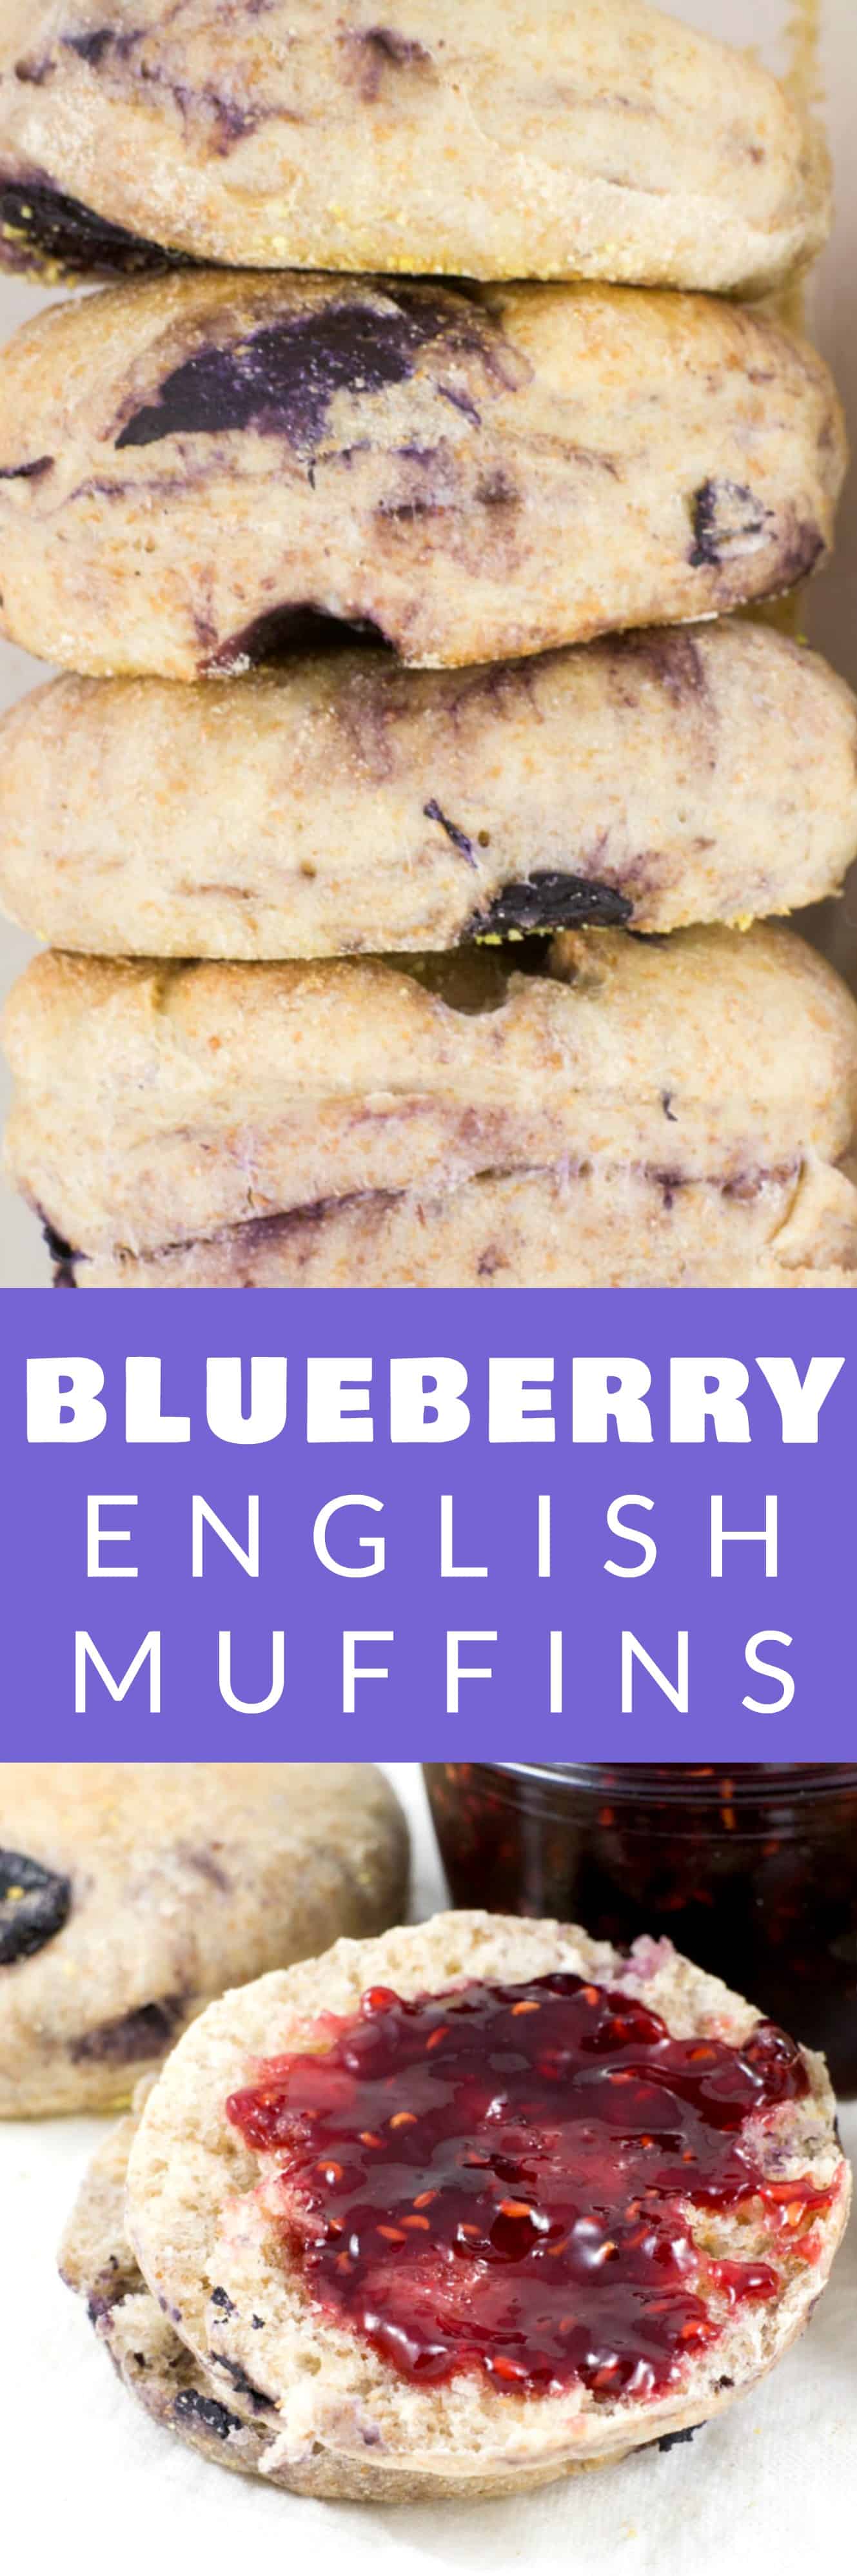 HOMEMADE Blueberry English Muffins! You're going to love this easy to make breakfast recipe! Save money and start making your own English muffins instead of buying the store bought ones. These ones are much more delicious and healthy! I love having one of these muffins with a cup of tea! 